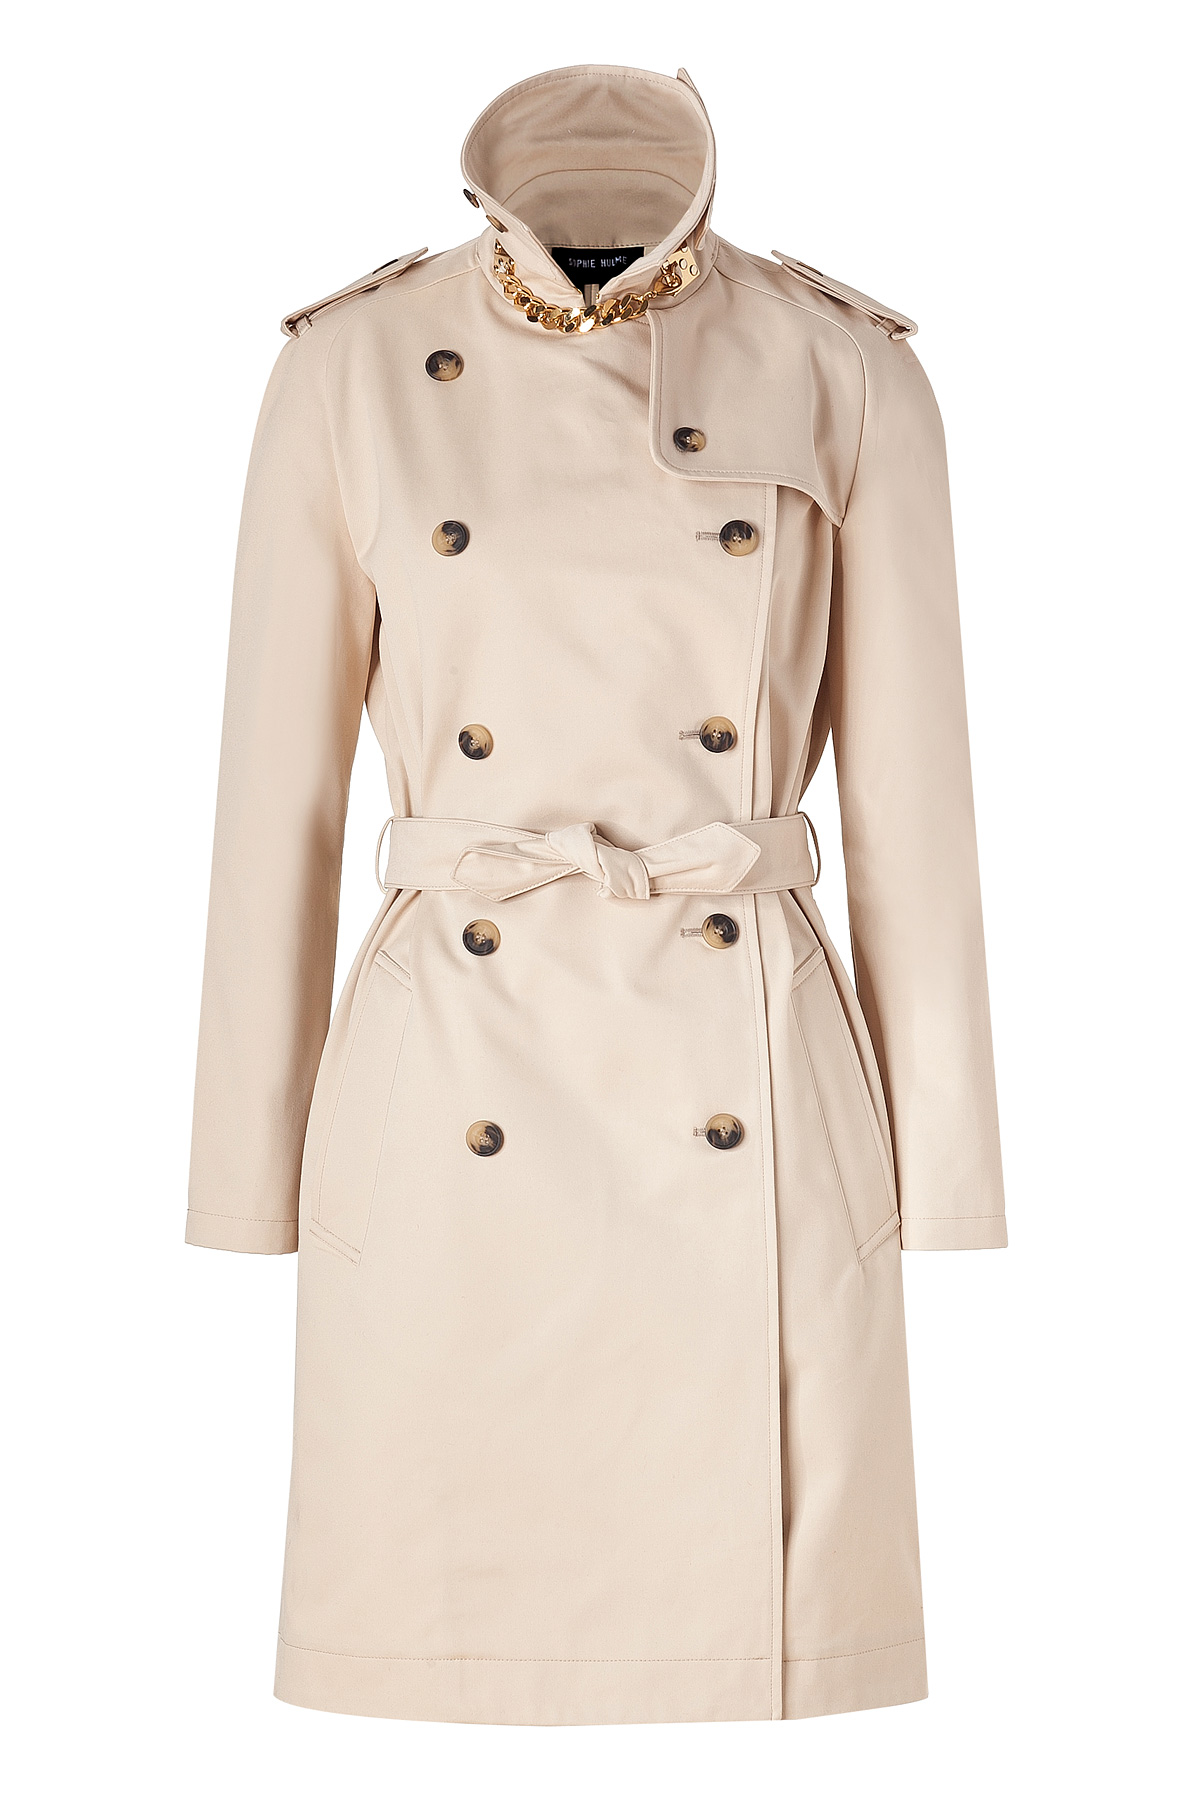 Sophie hulme Cream Cotton Trench Coat with Goldplated Chain Latch in ...